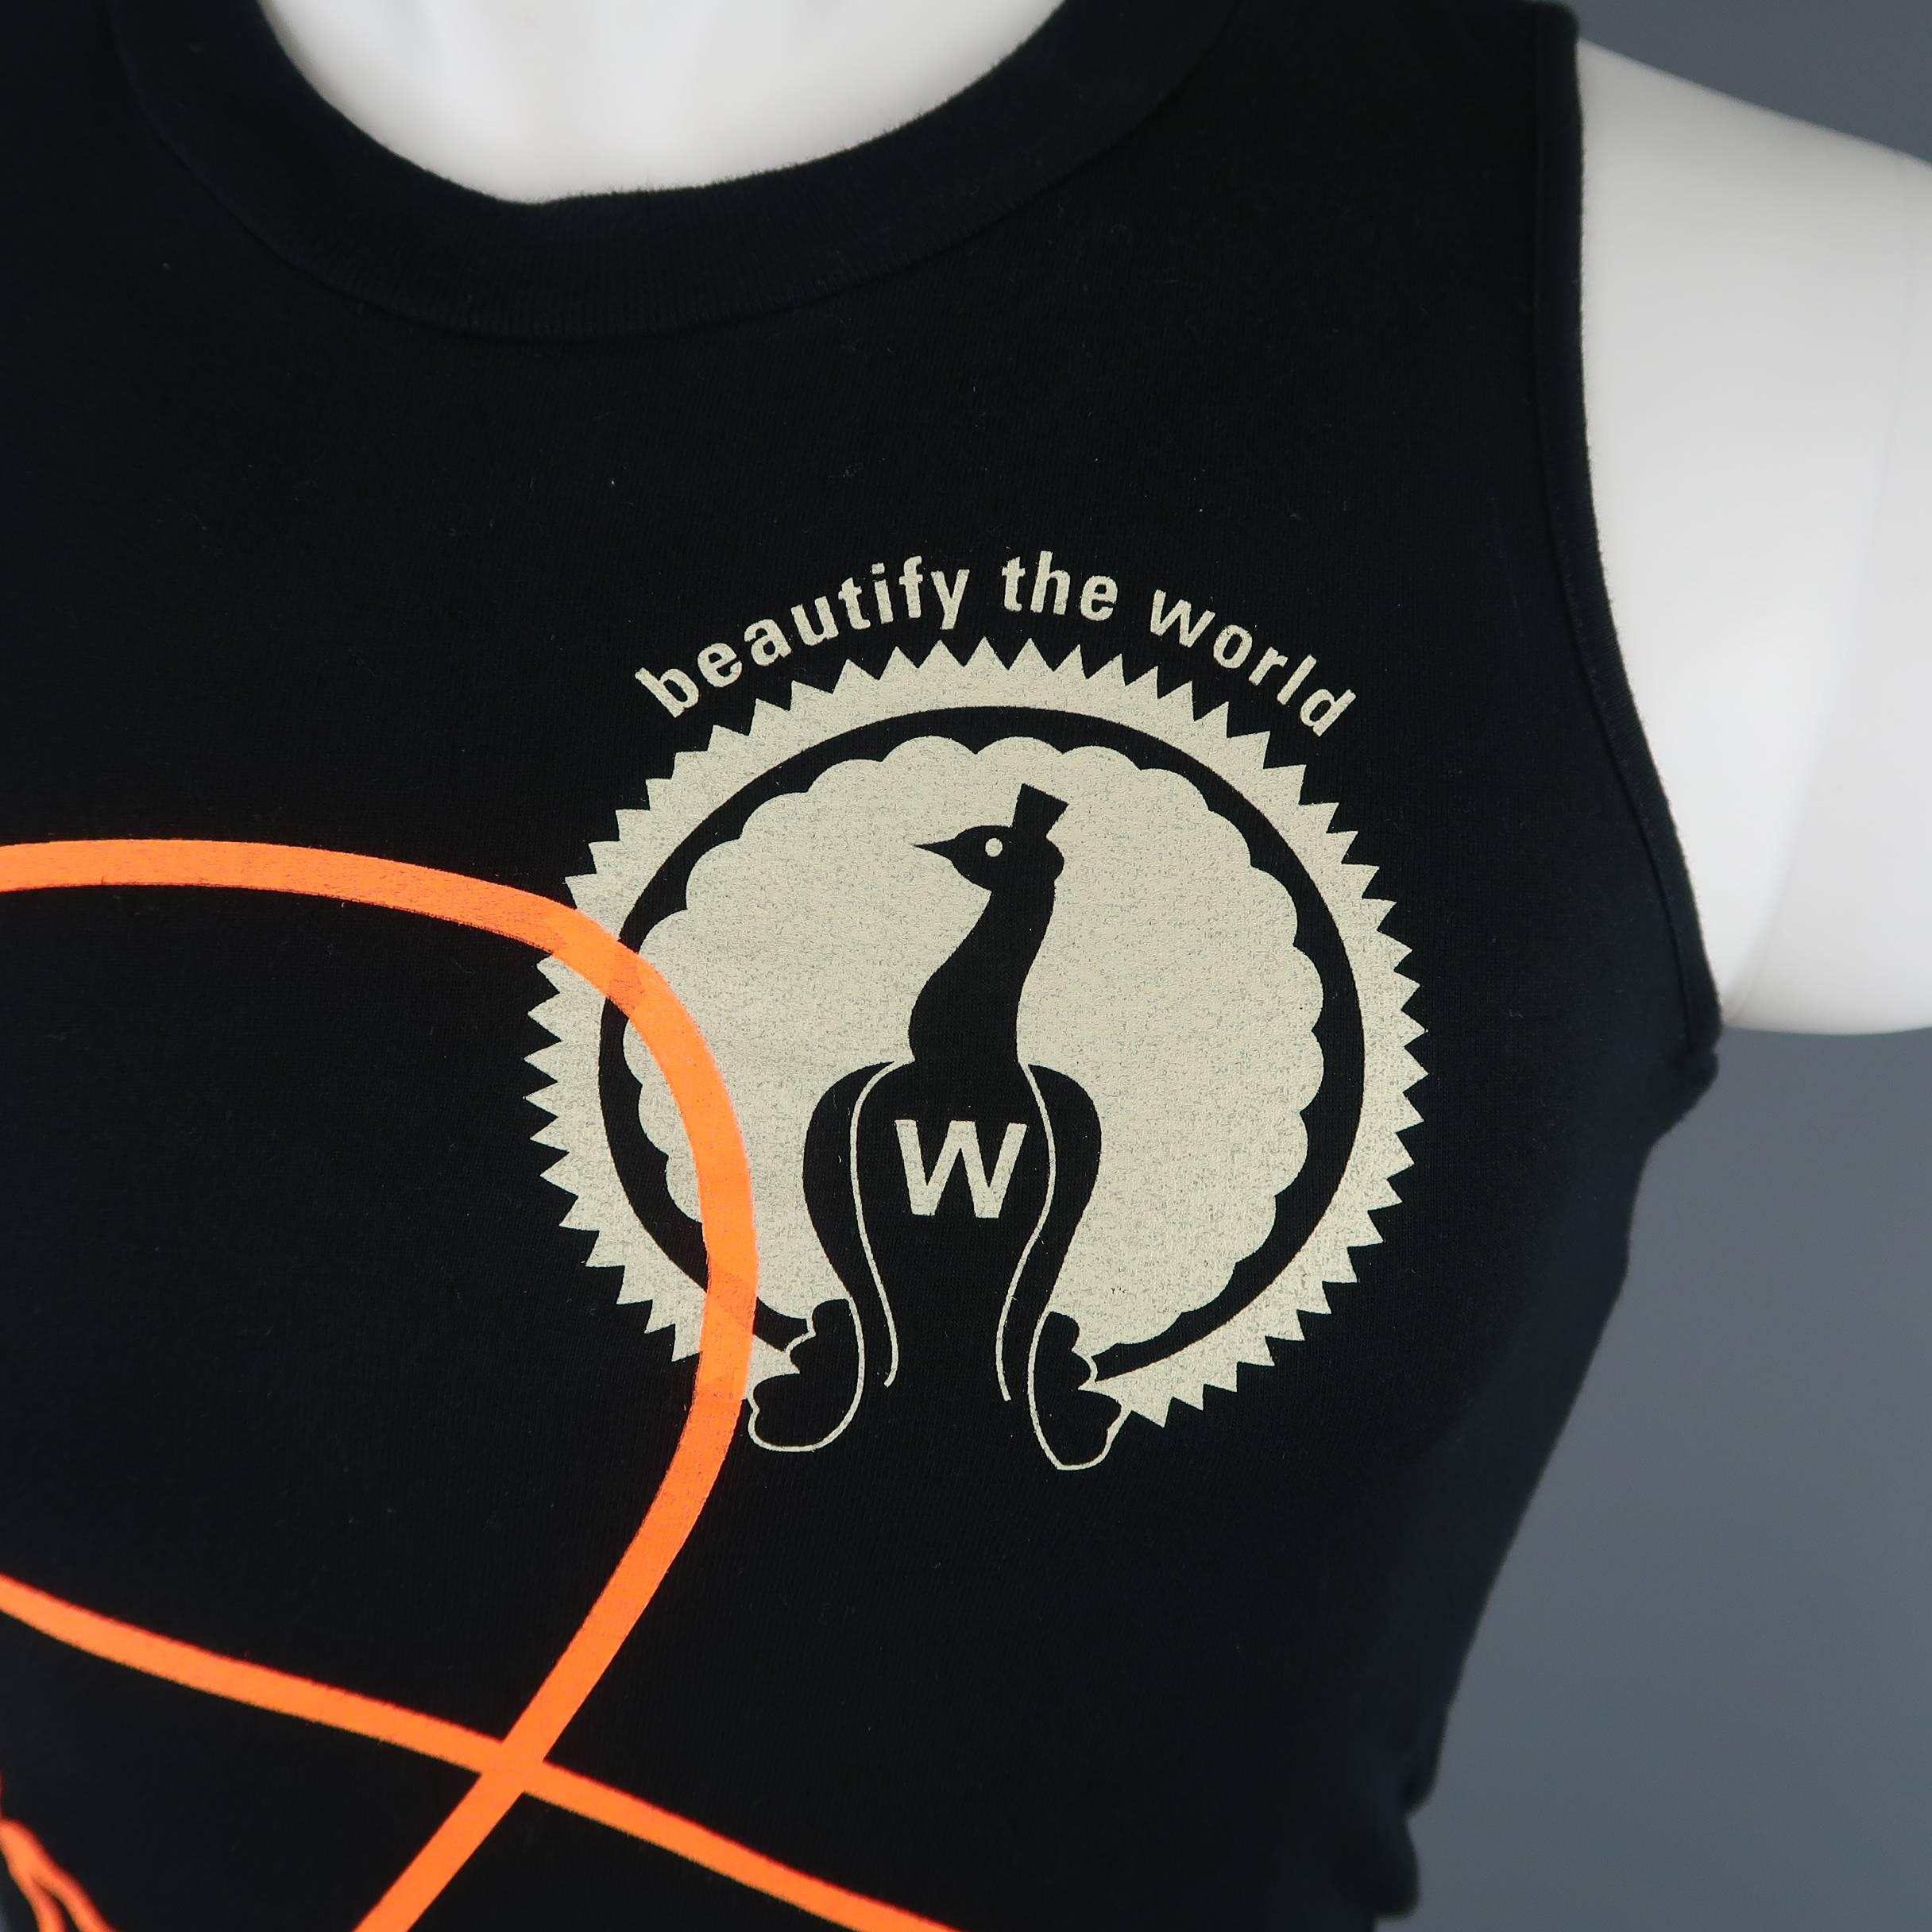 Archive WALTER VAN BEIRENDONCK tank top comes in black jersey with an orange and beige 